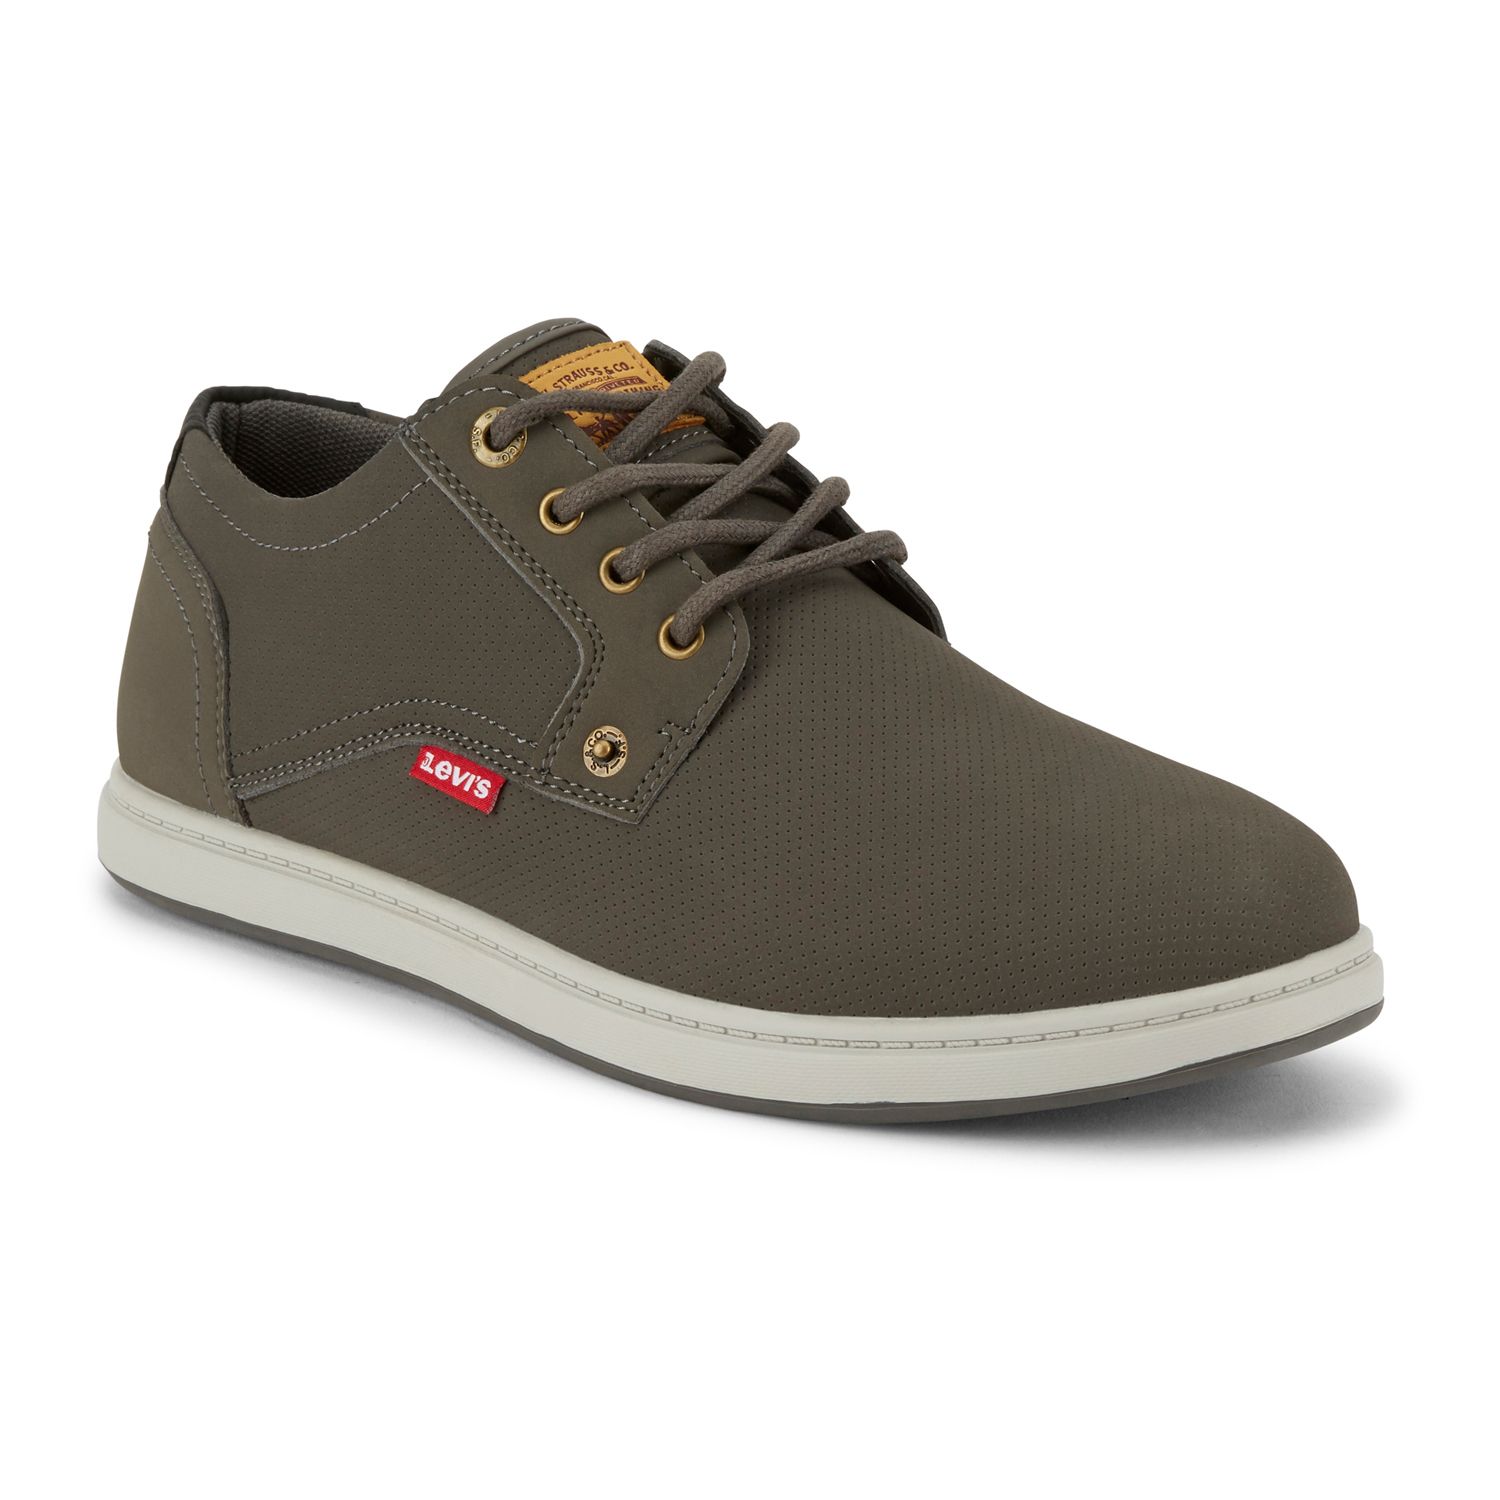 Image for Levi's Arnold Pin Perforated C Men's Sneakers at Kohl's.